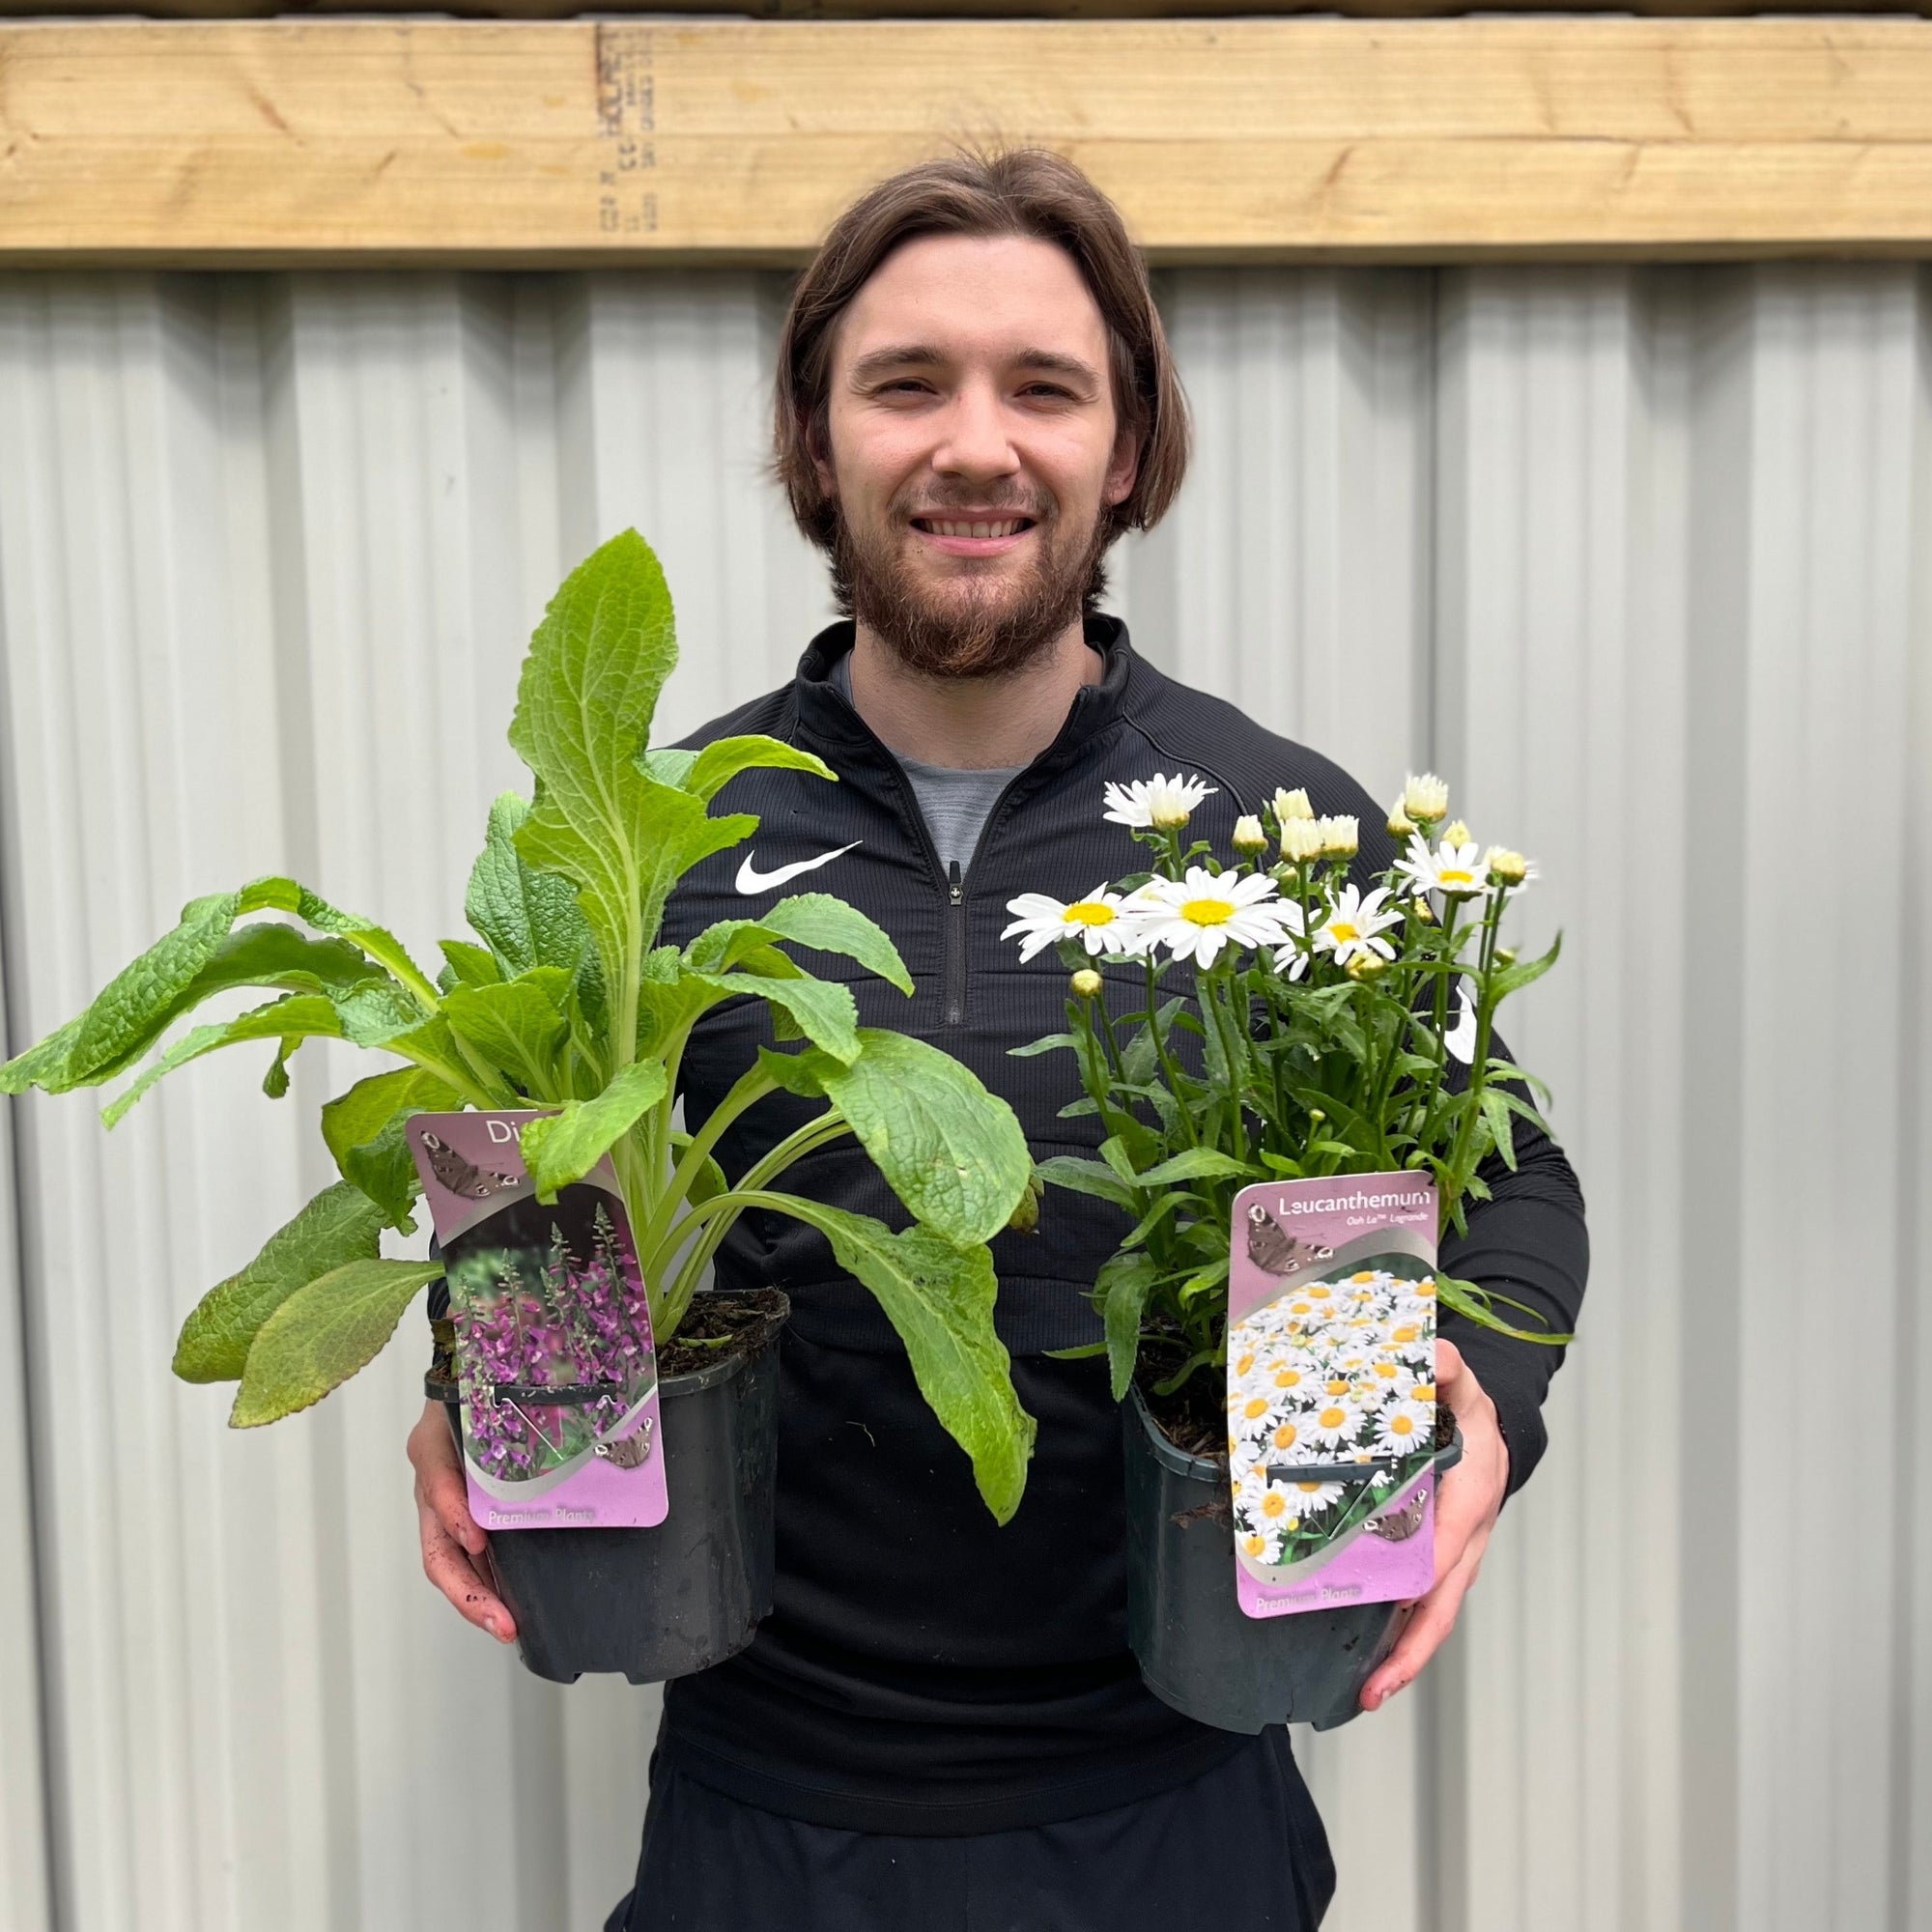 Our Selection of 2L Perennial Plants